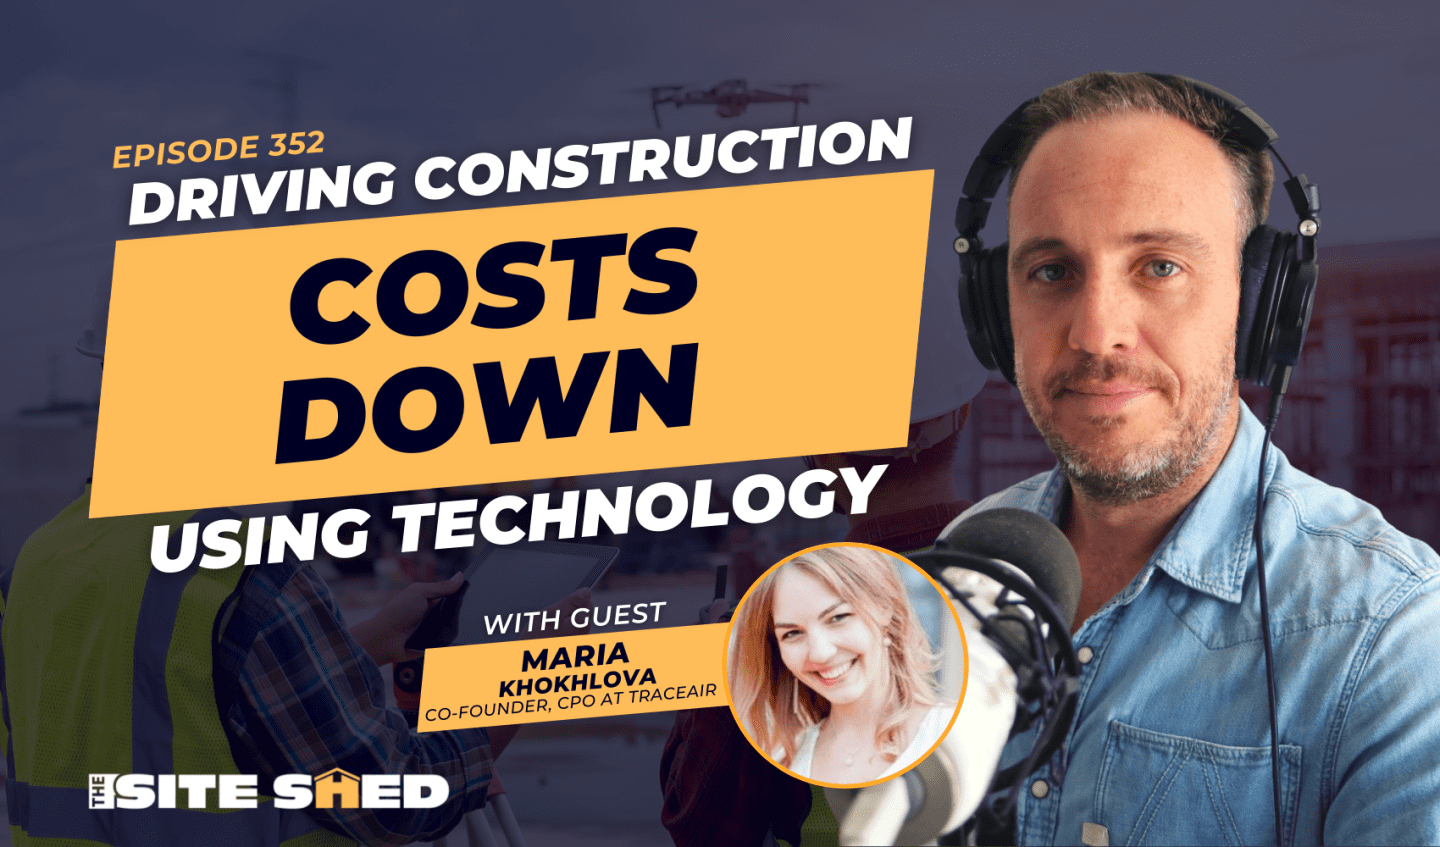 Driving construction costs down using technology